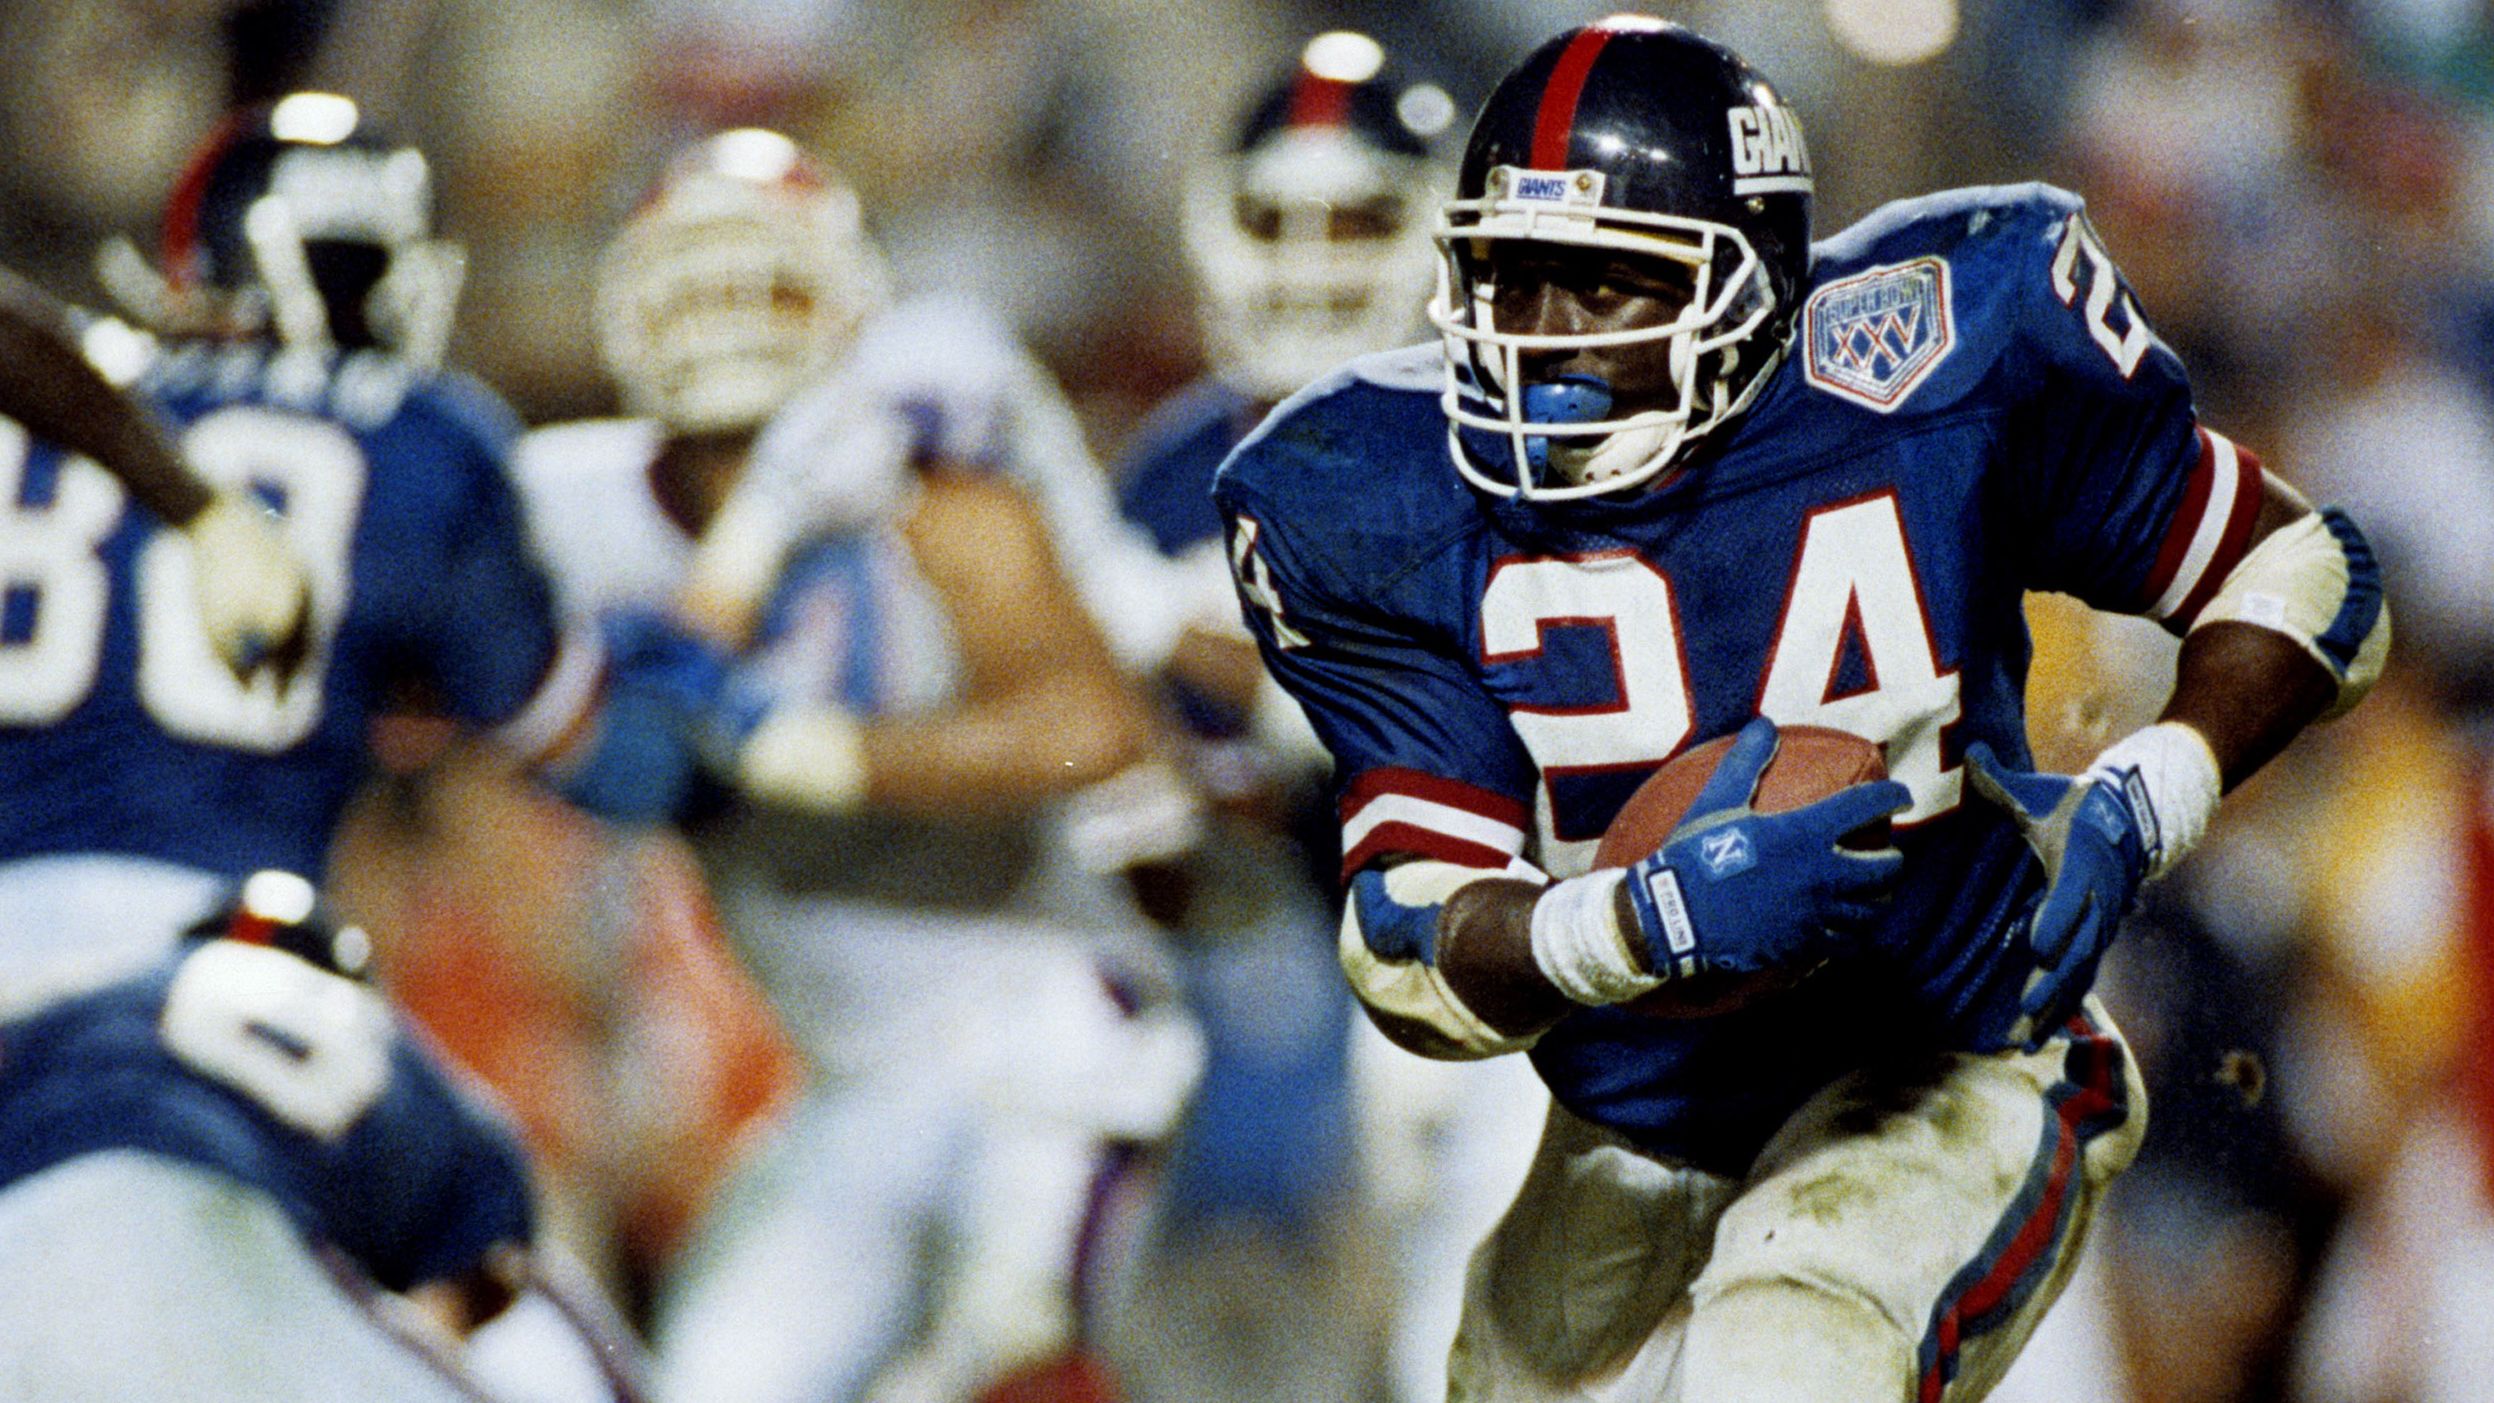 <strong>Super Bowl XXV (1991):</strong> Super Bowl XXV will likely always be remembered for Buffalo kicker Scott Norwood missing a field goal as time expired. But New York Giants running back Ottis Anderson won MVP in what was the closest Super Bowl ever. Anderson had 102 yards and a touchdown as the Giants prevailed 20-19.